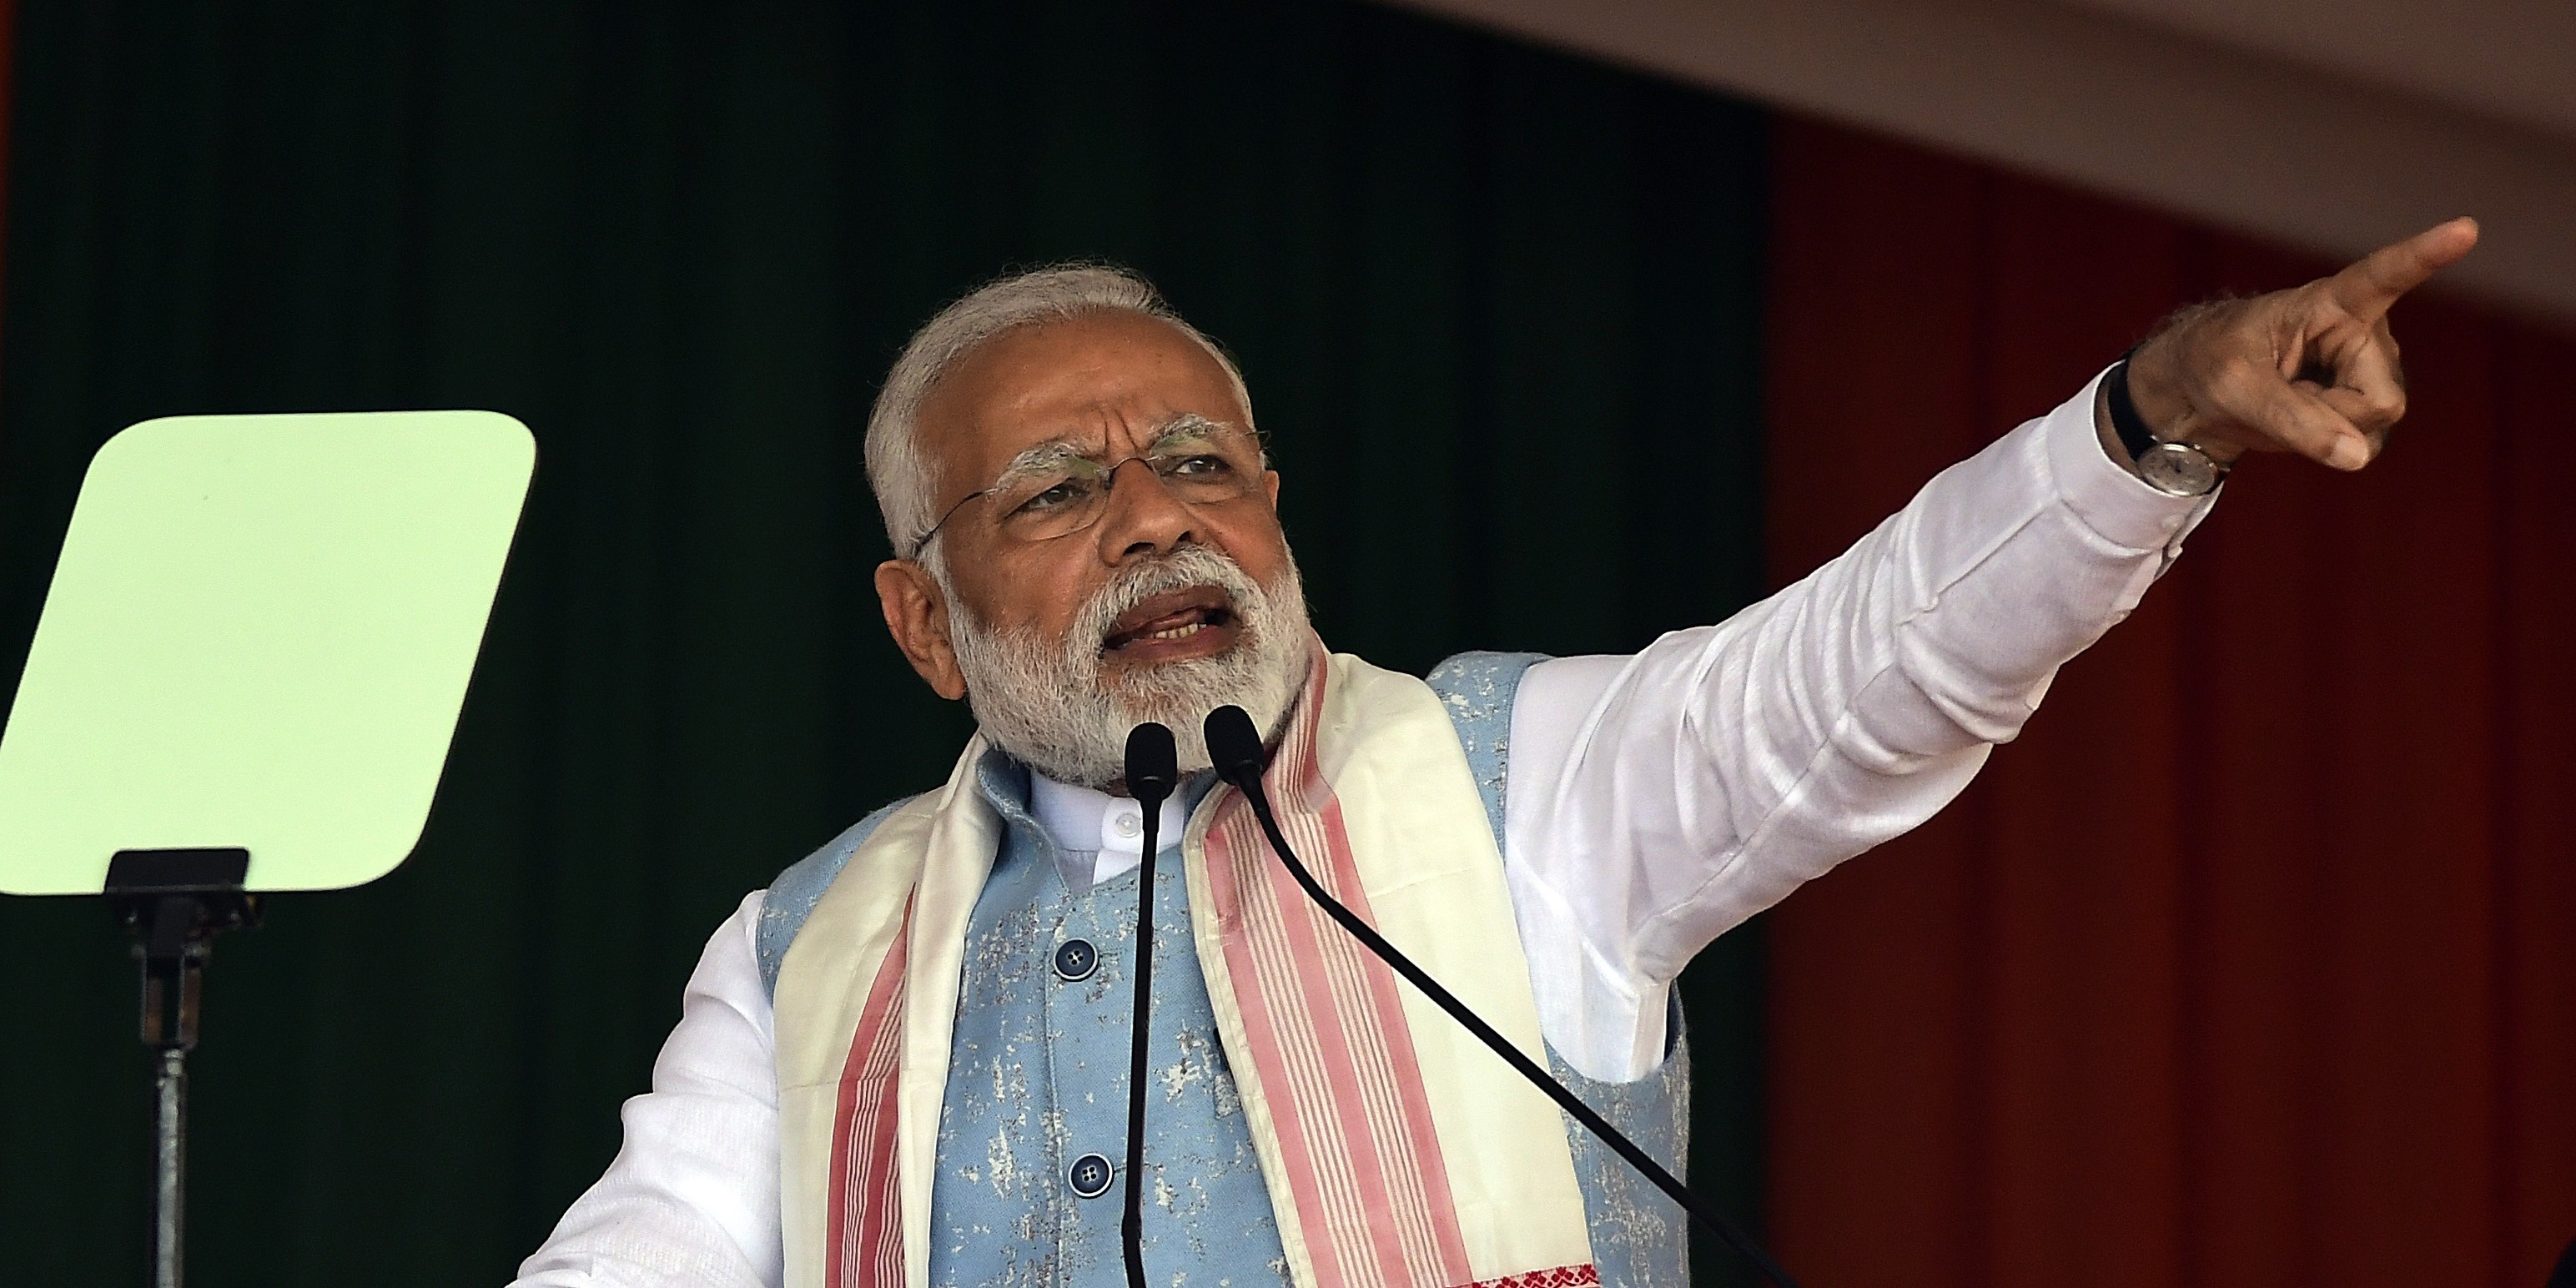 Indian Prime Minister Narendra Modi addresses a rally in February. As India votes to elect its new government, opposition leaders have accused Modi of focusing on virulent nationalism after a terror attack on uniformed forces, as a ploy to divert attention from economic missteps and job losses. Photo: EPA